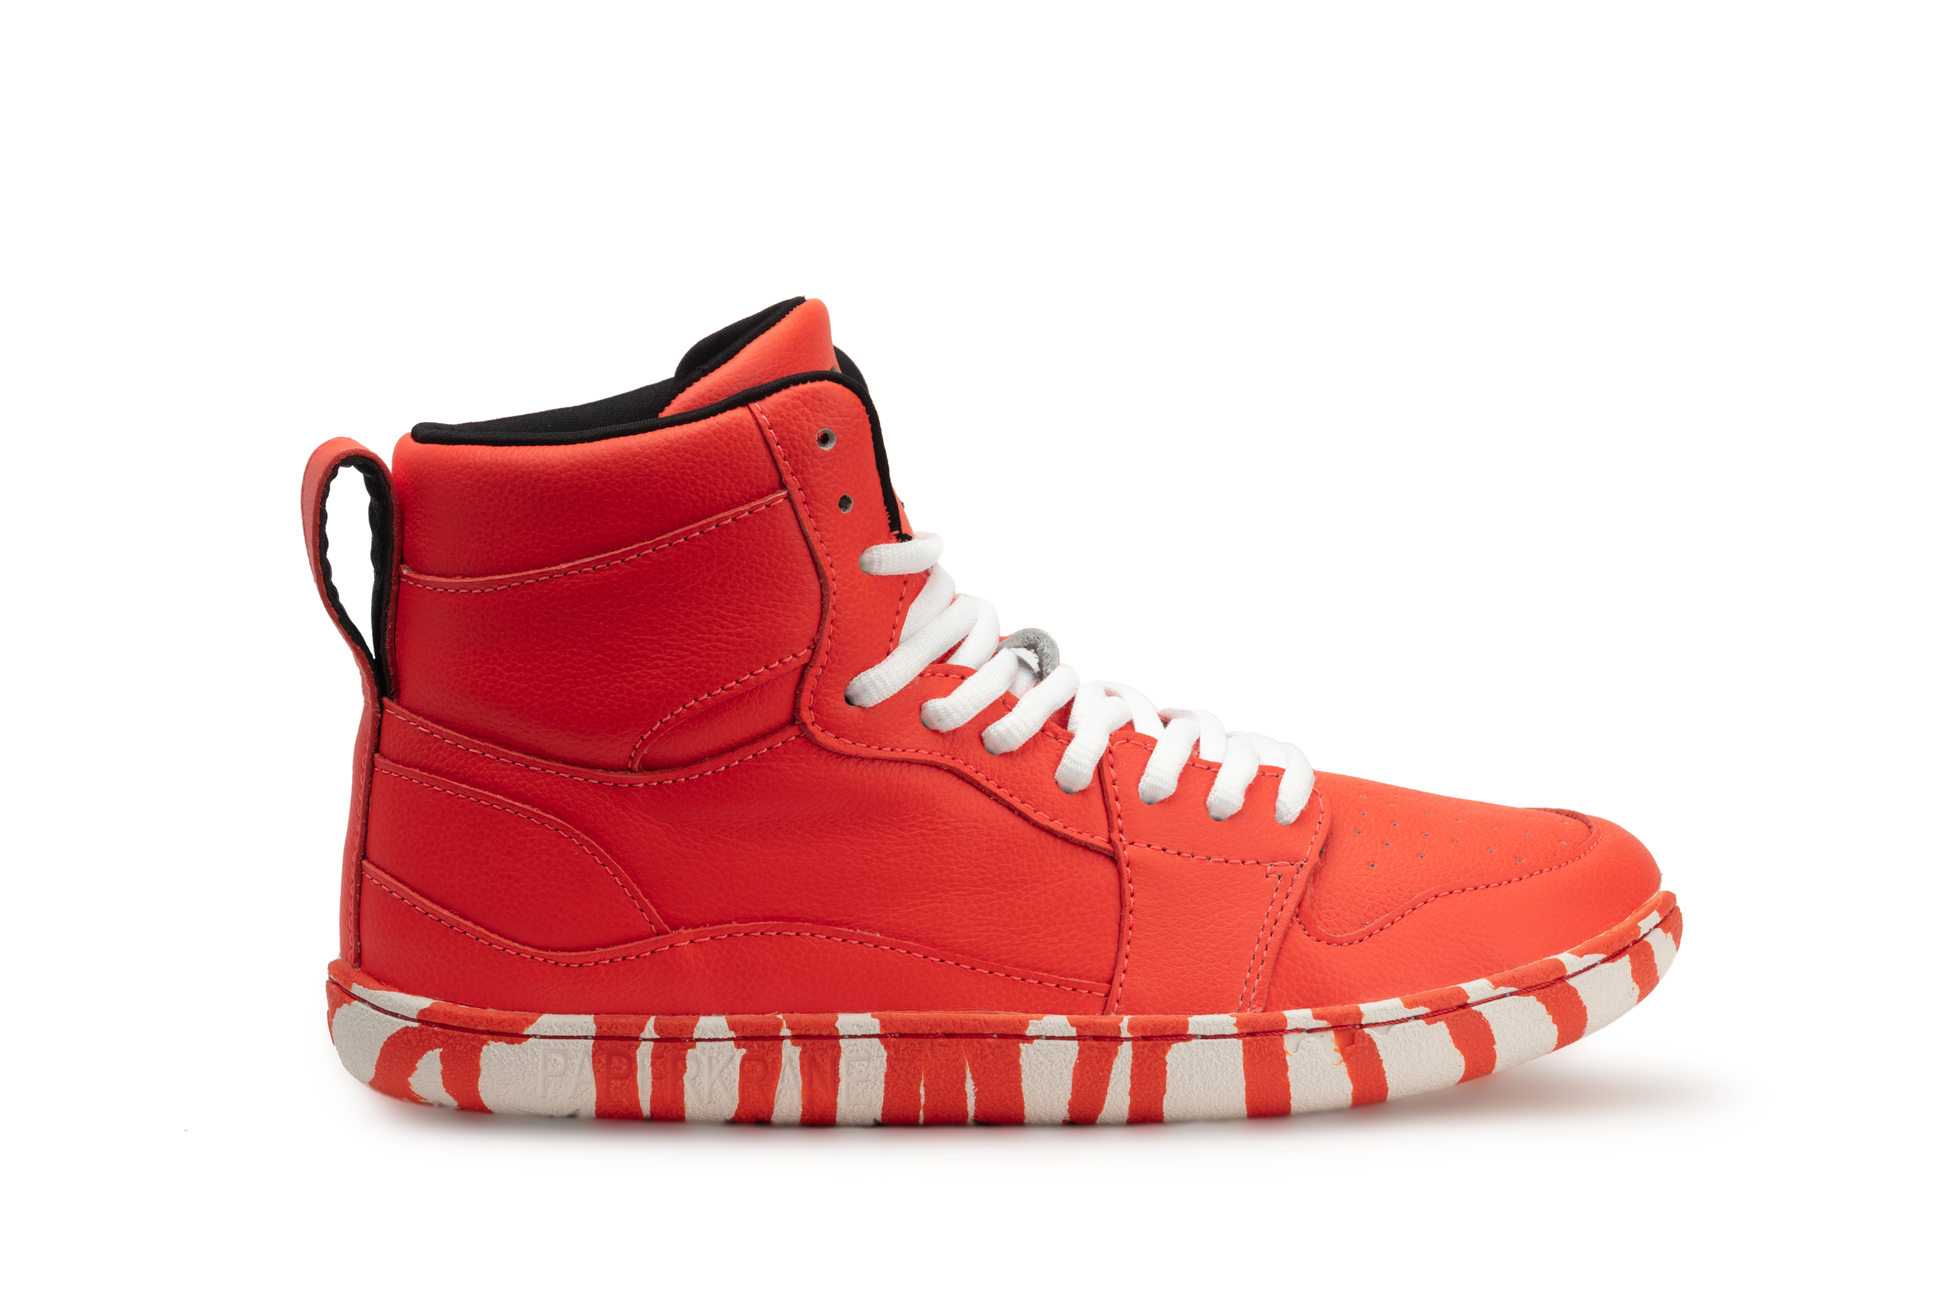 OUTSIDE VIEW OF PK CANDY CANE HIGH TOPS